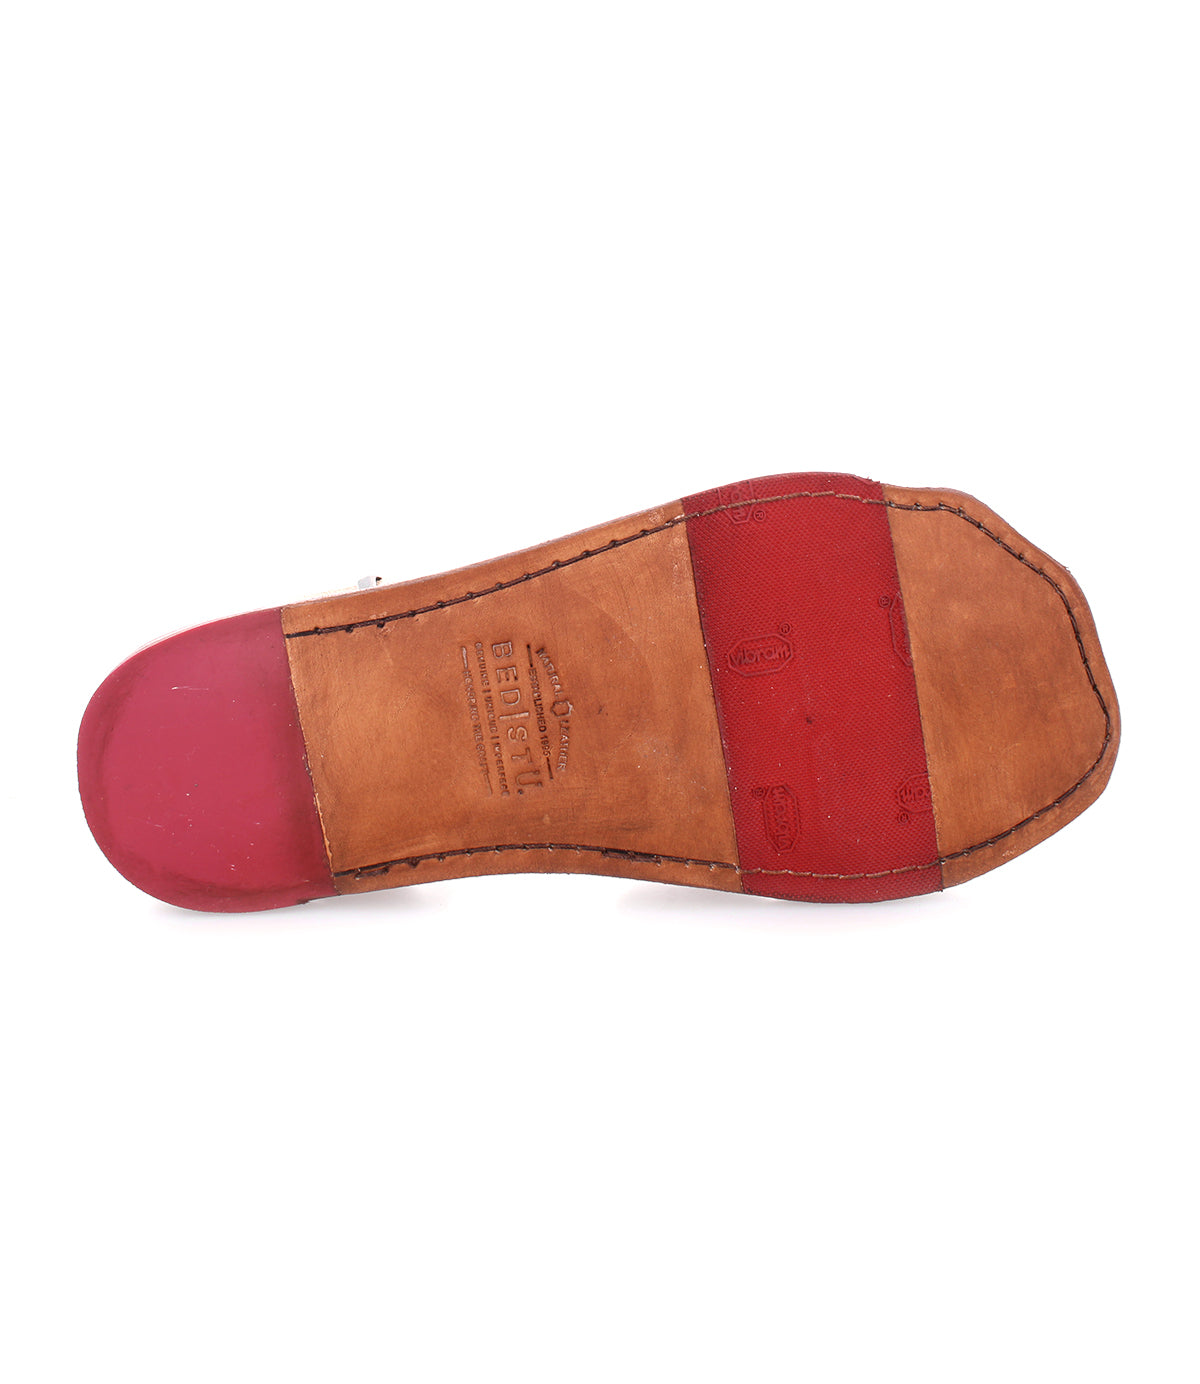 A pair of Afrodita shoes with red and tan soles by Bed Stu.